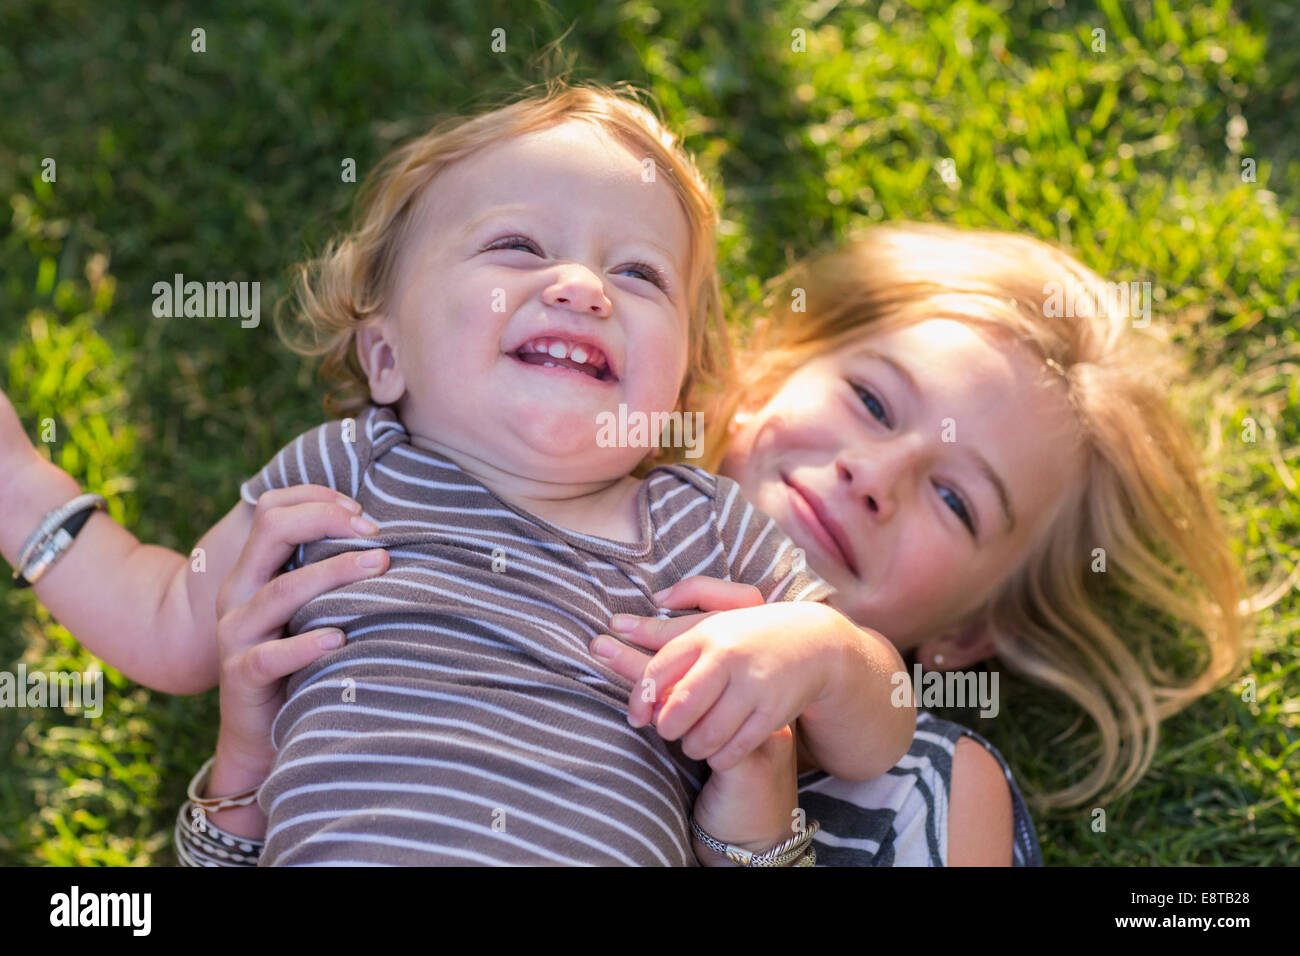 Caucasian sister holding baby brother in grass Stock Photo